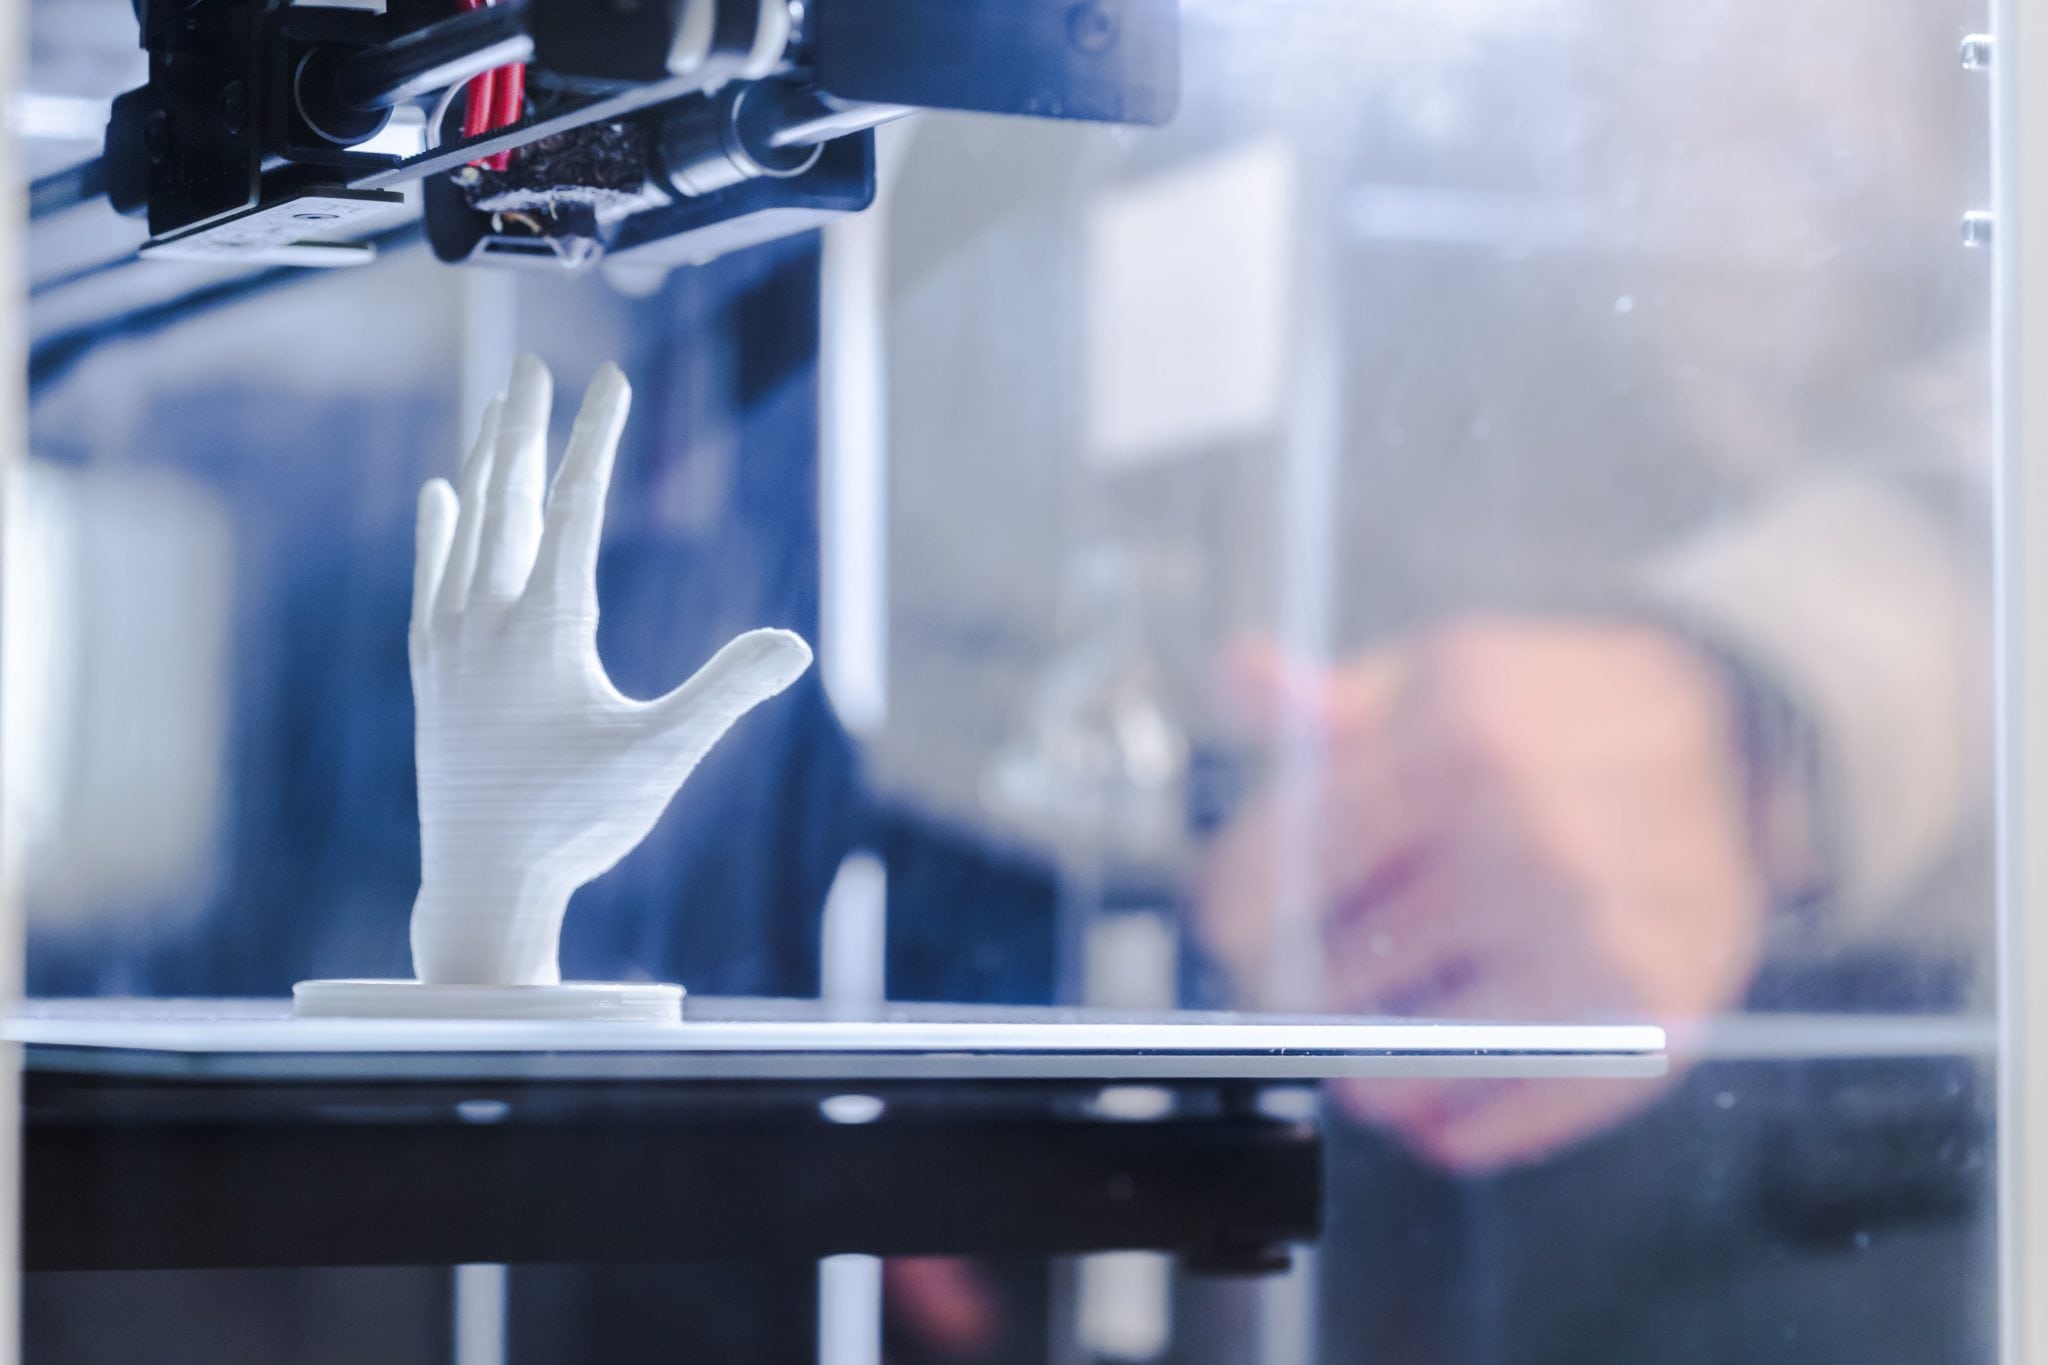 3D Printing is changing medicine